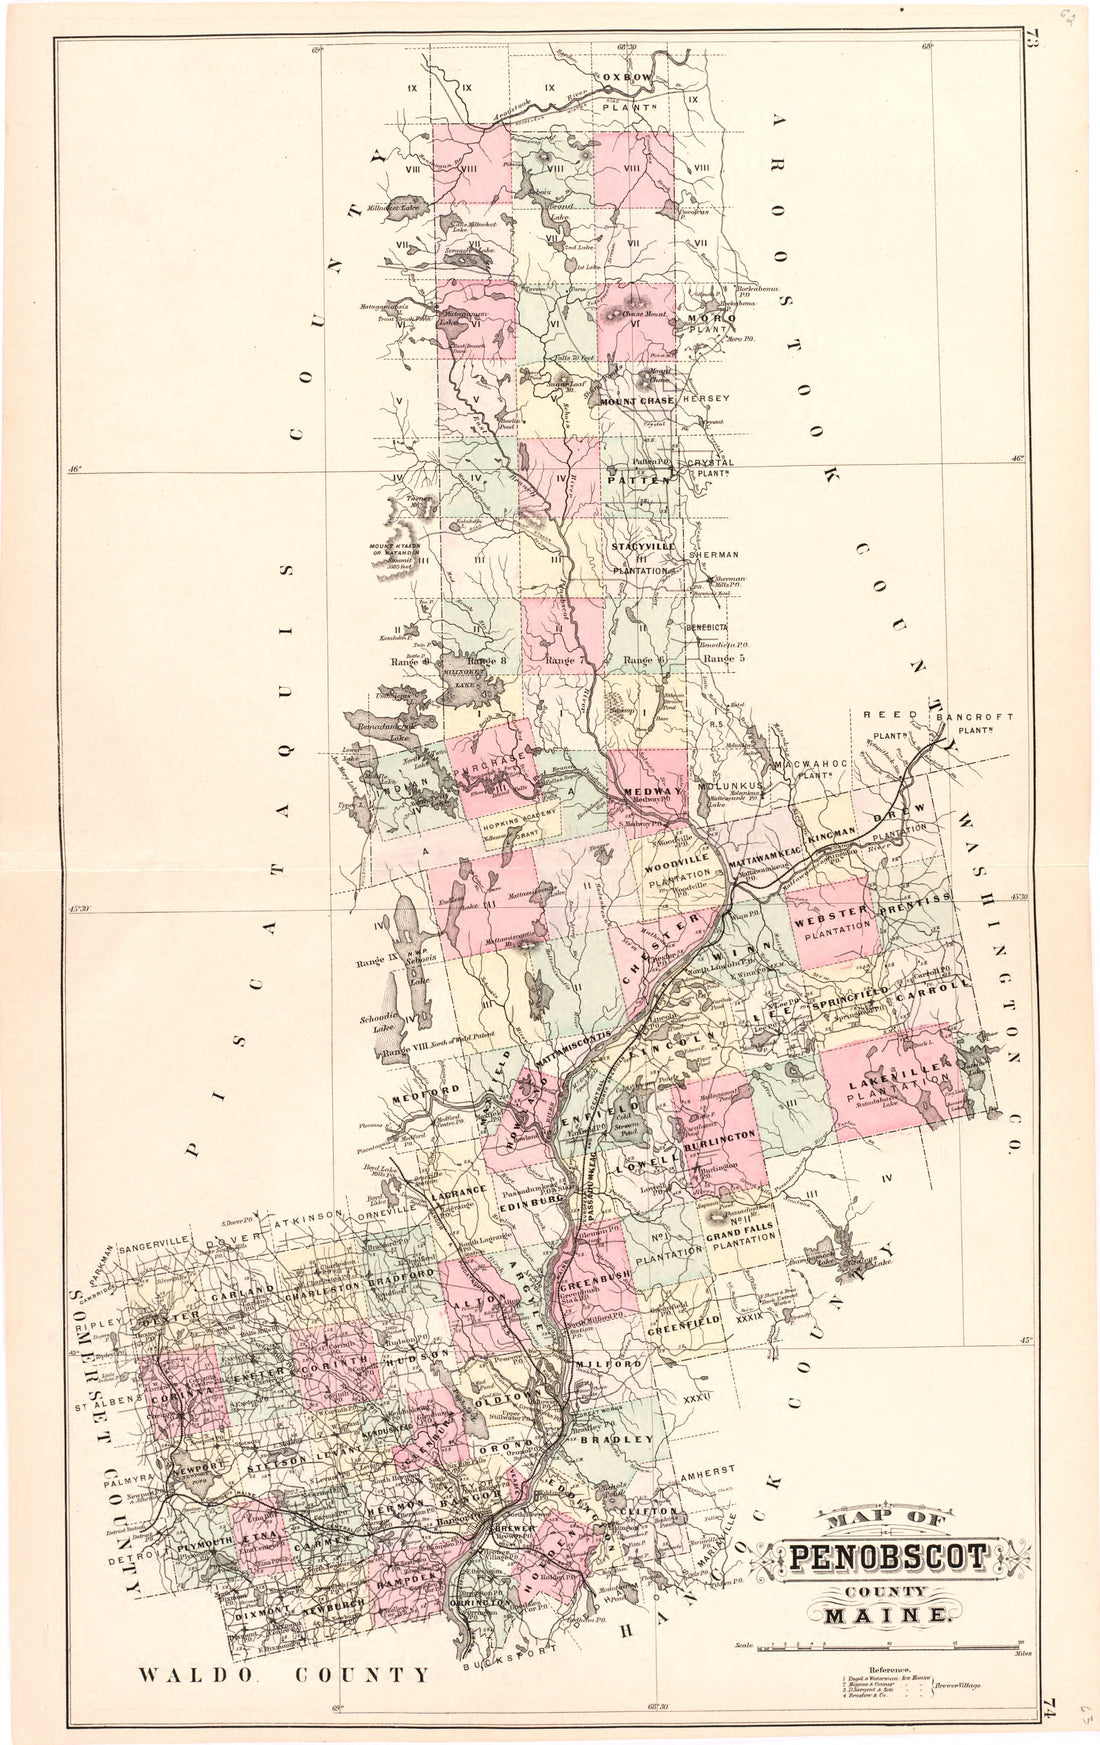 This hand drawn illustration (map) of Map of Penobscot County Maine from Colby&